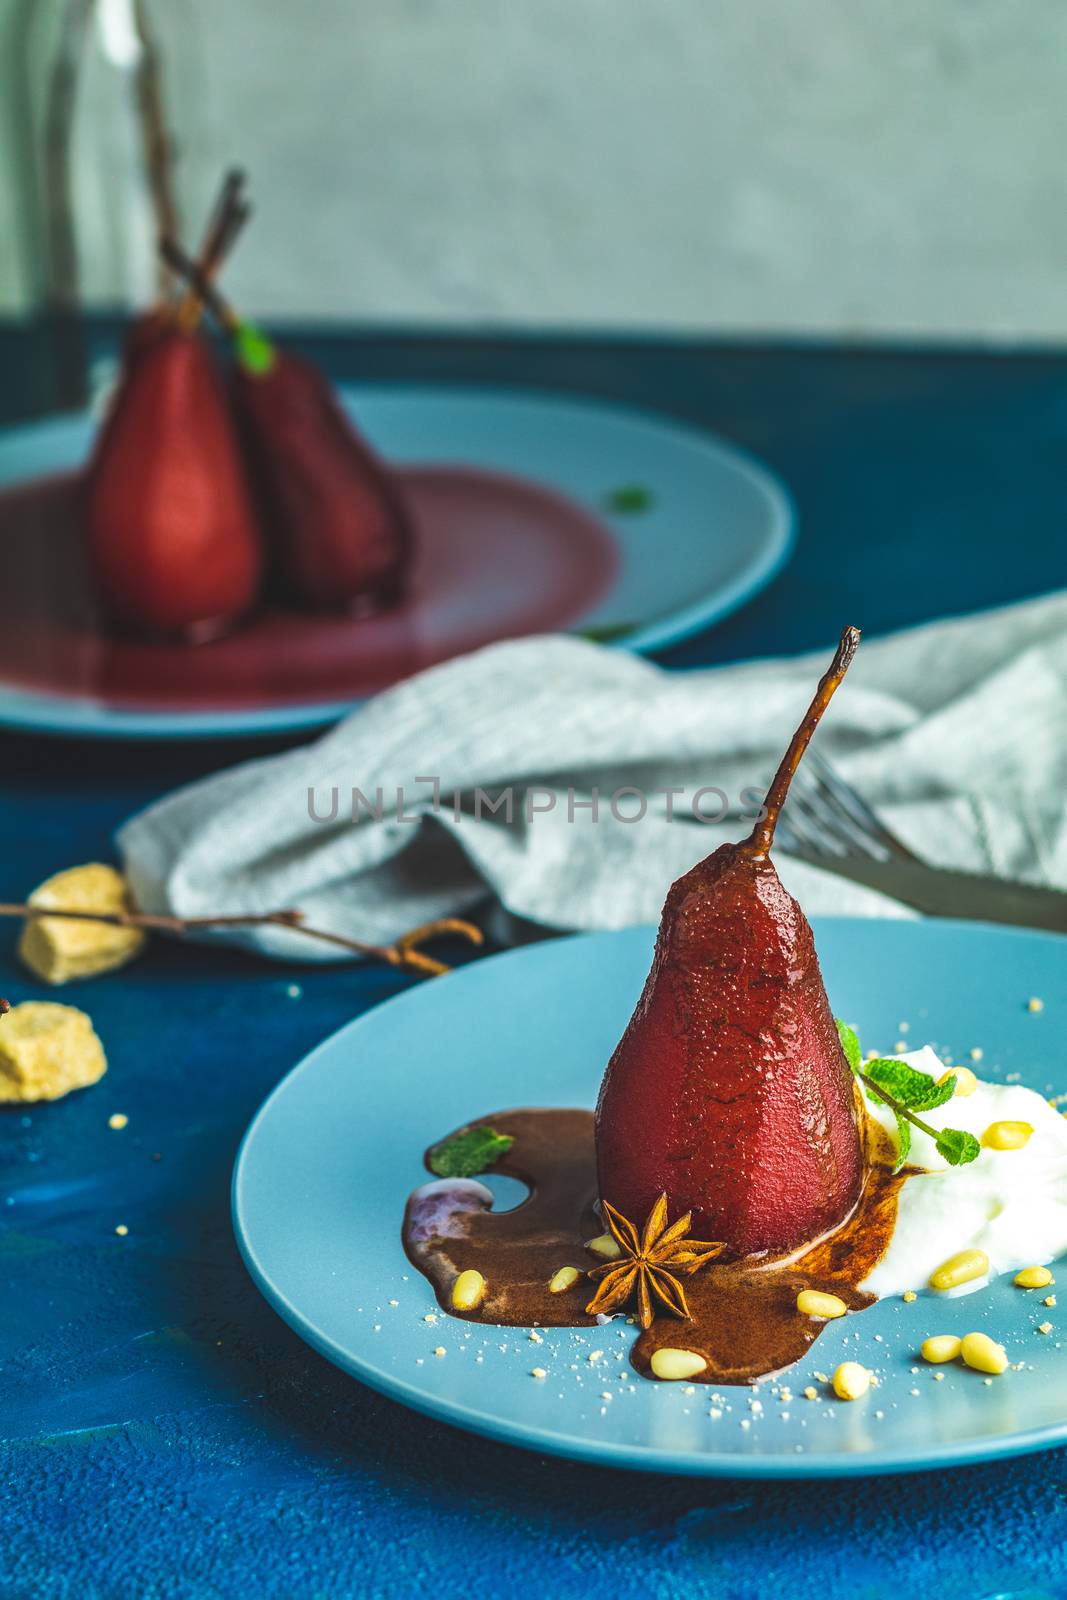 Pears in wine. Traditional dessert pears stewed in red wine with chocolate sauce on plate on blue concrete surface. Concept for romantic dinner dessert